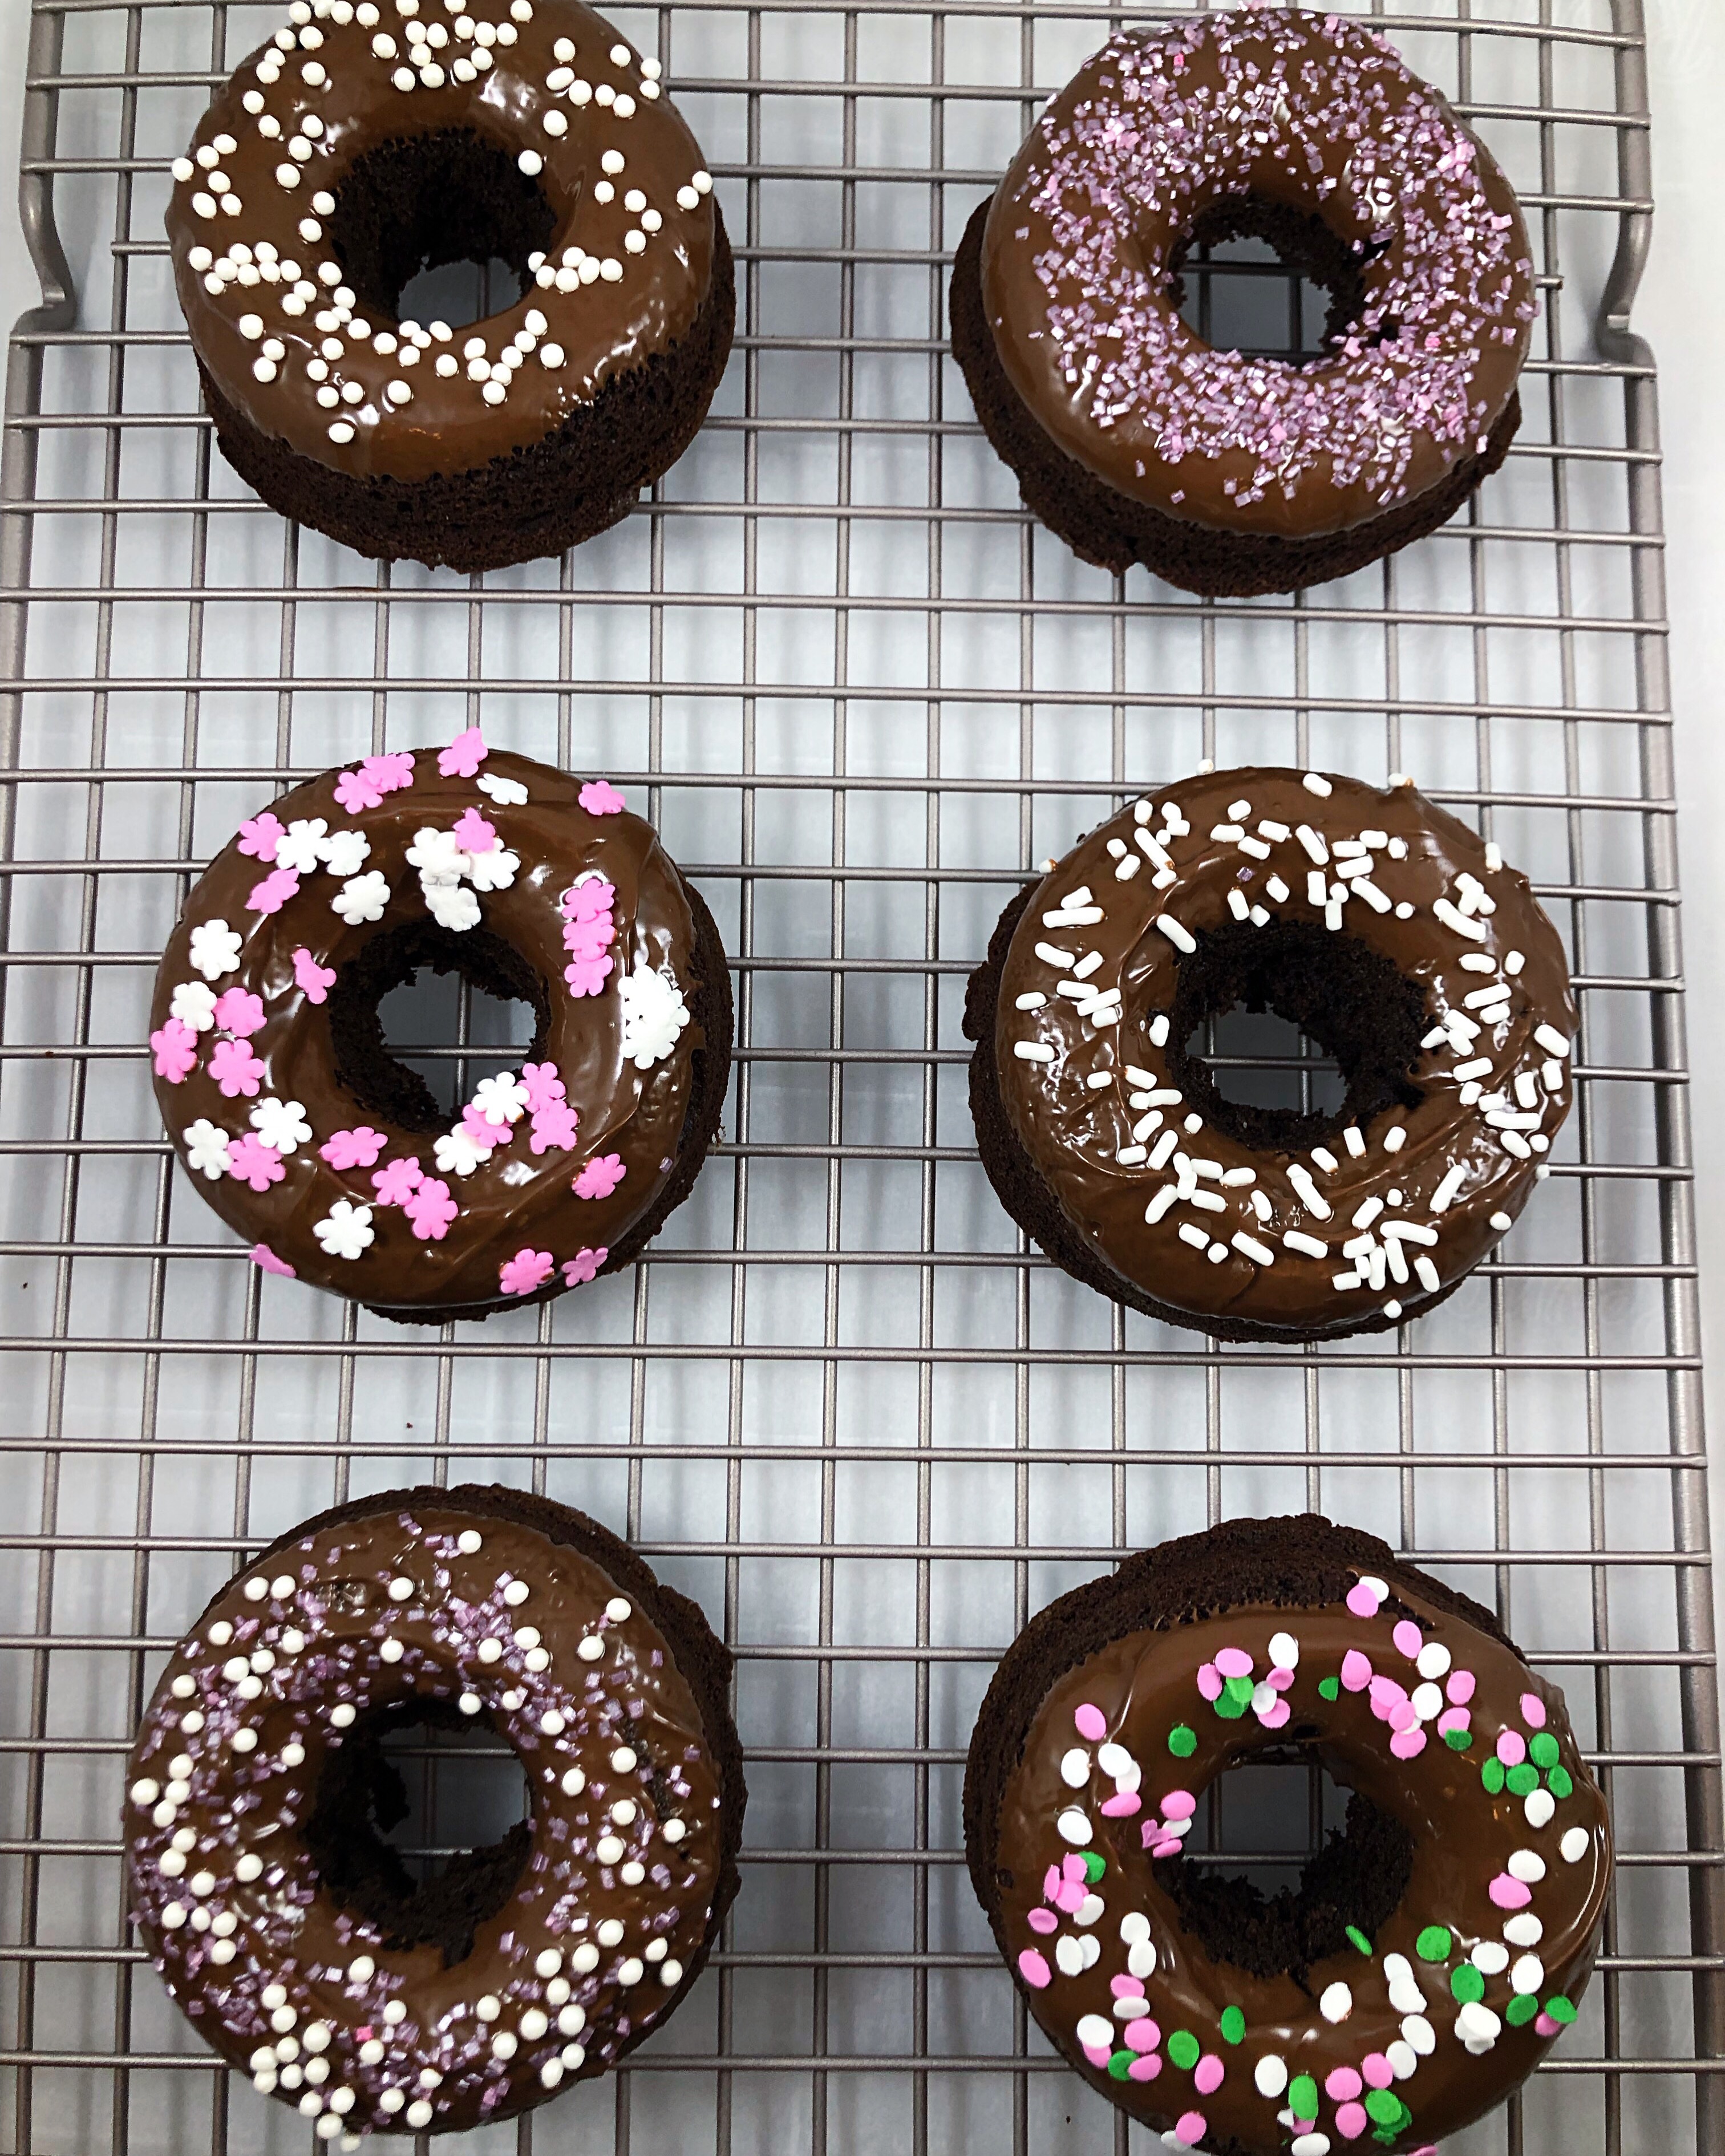 Paleo Chocolate Frosted Donuts